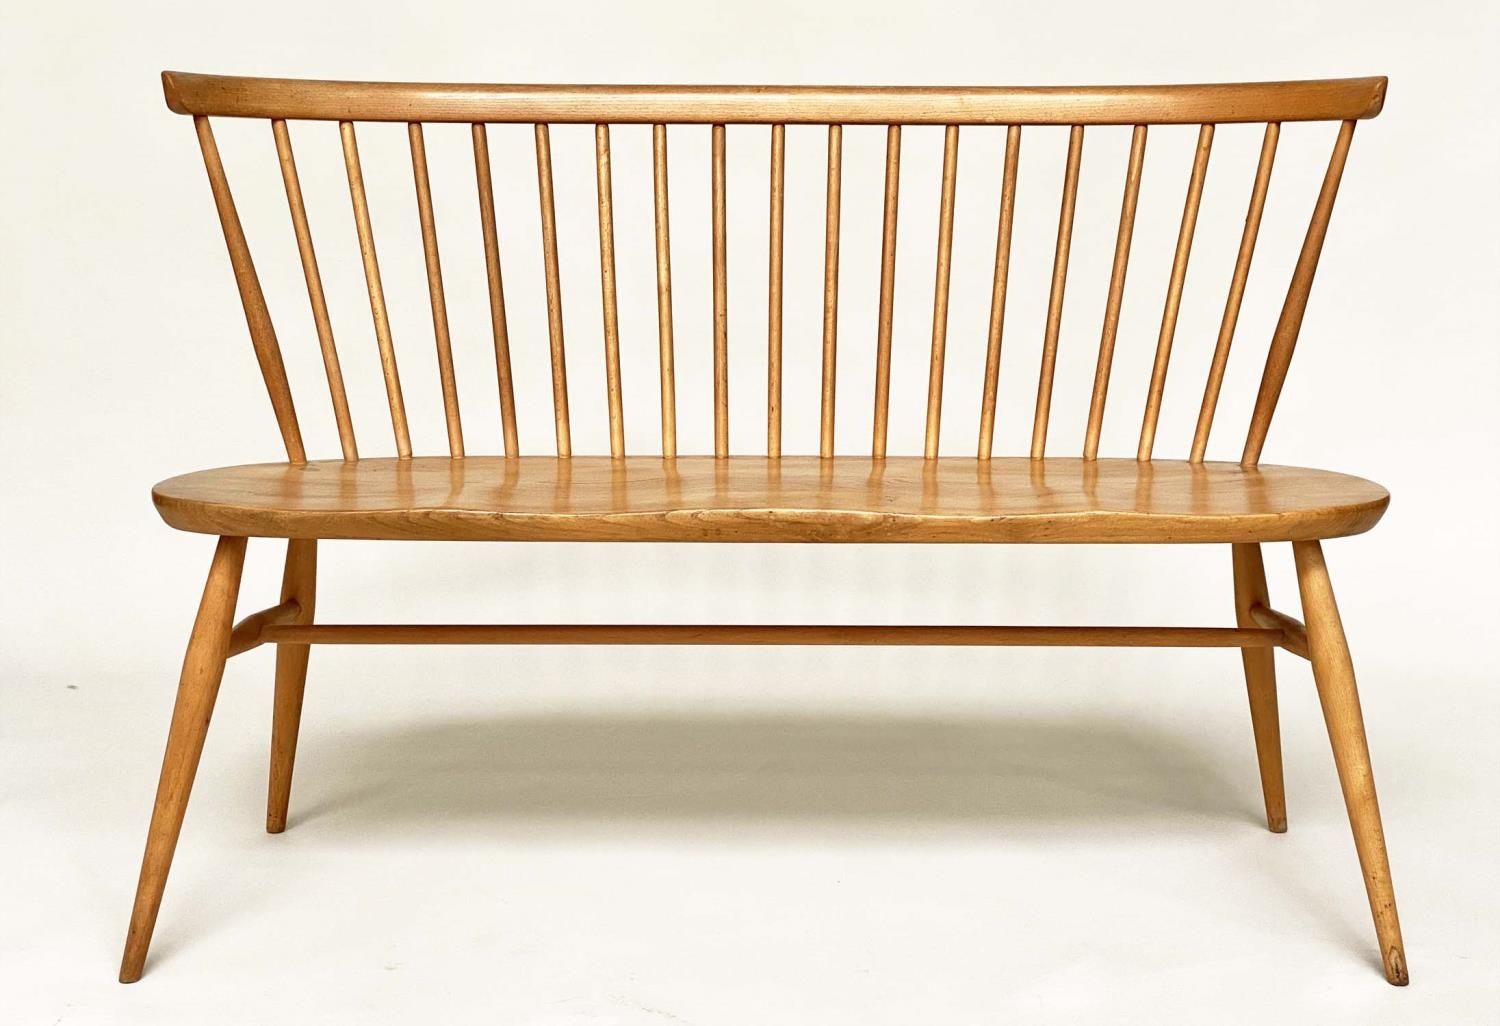 'ERCOL' HALL BENCH, 1970s beech and elm with slightly arched spindle-back attributed to 'Ercol', - Image 9 of 9